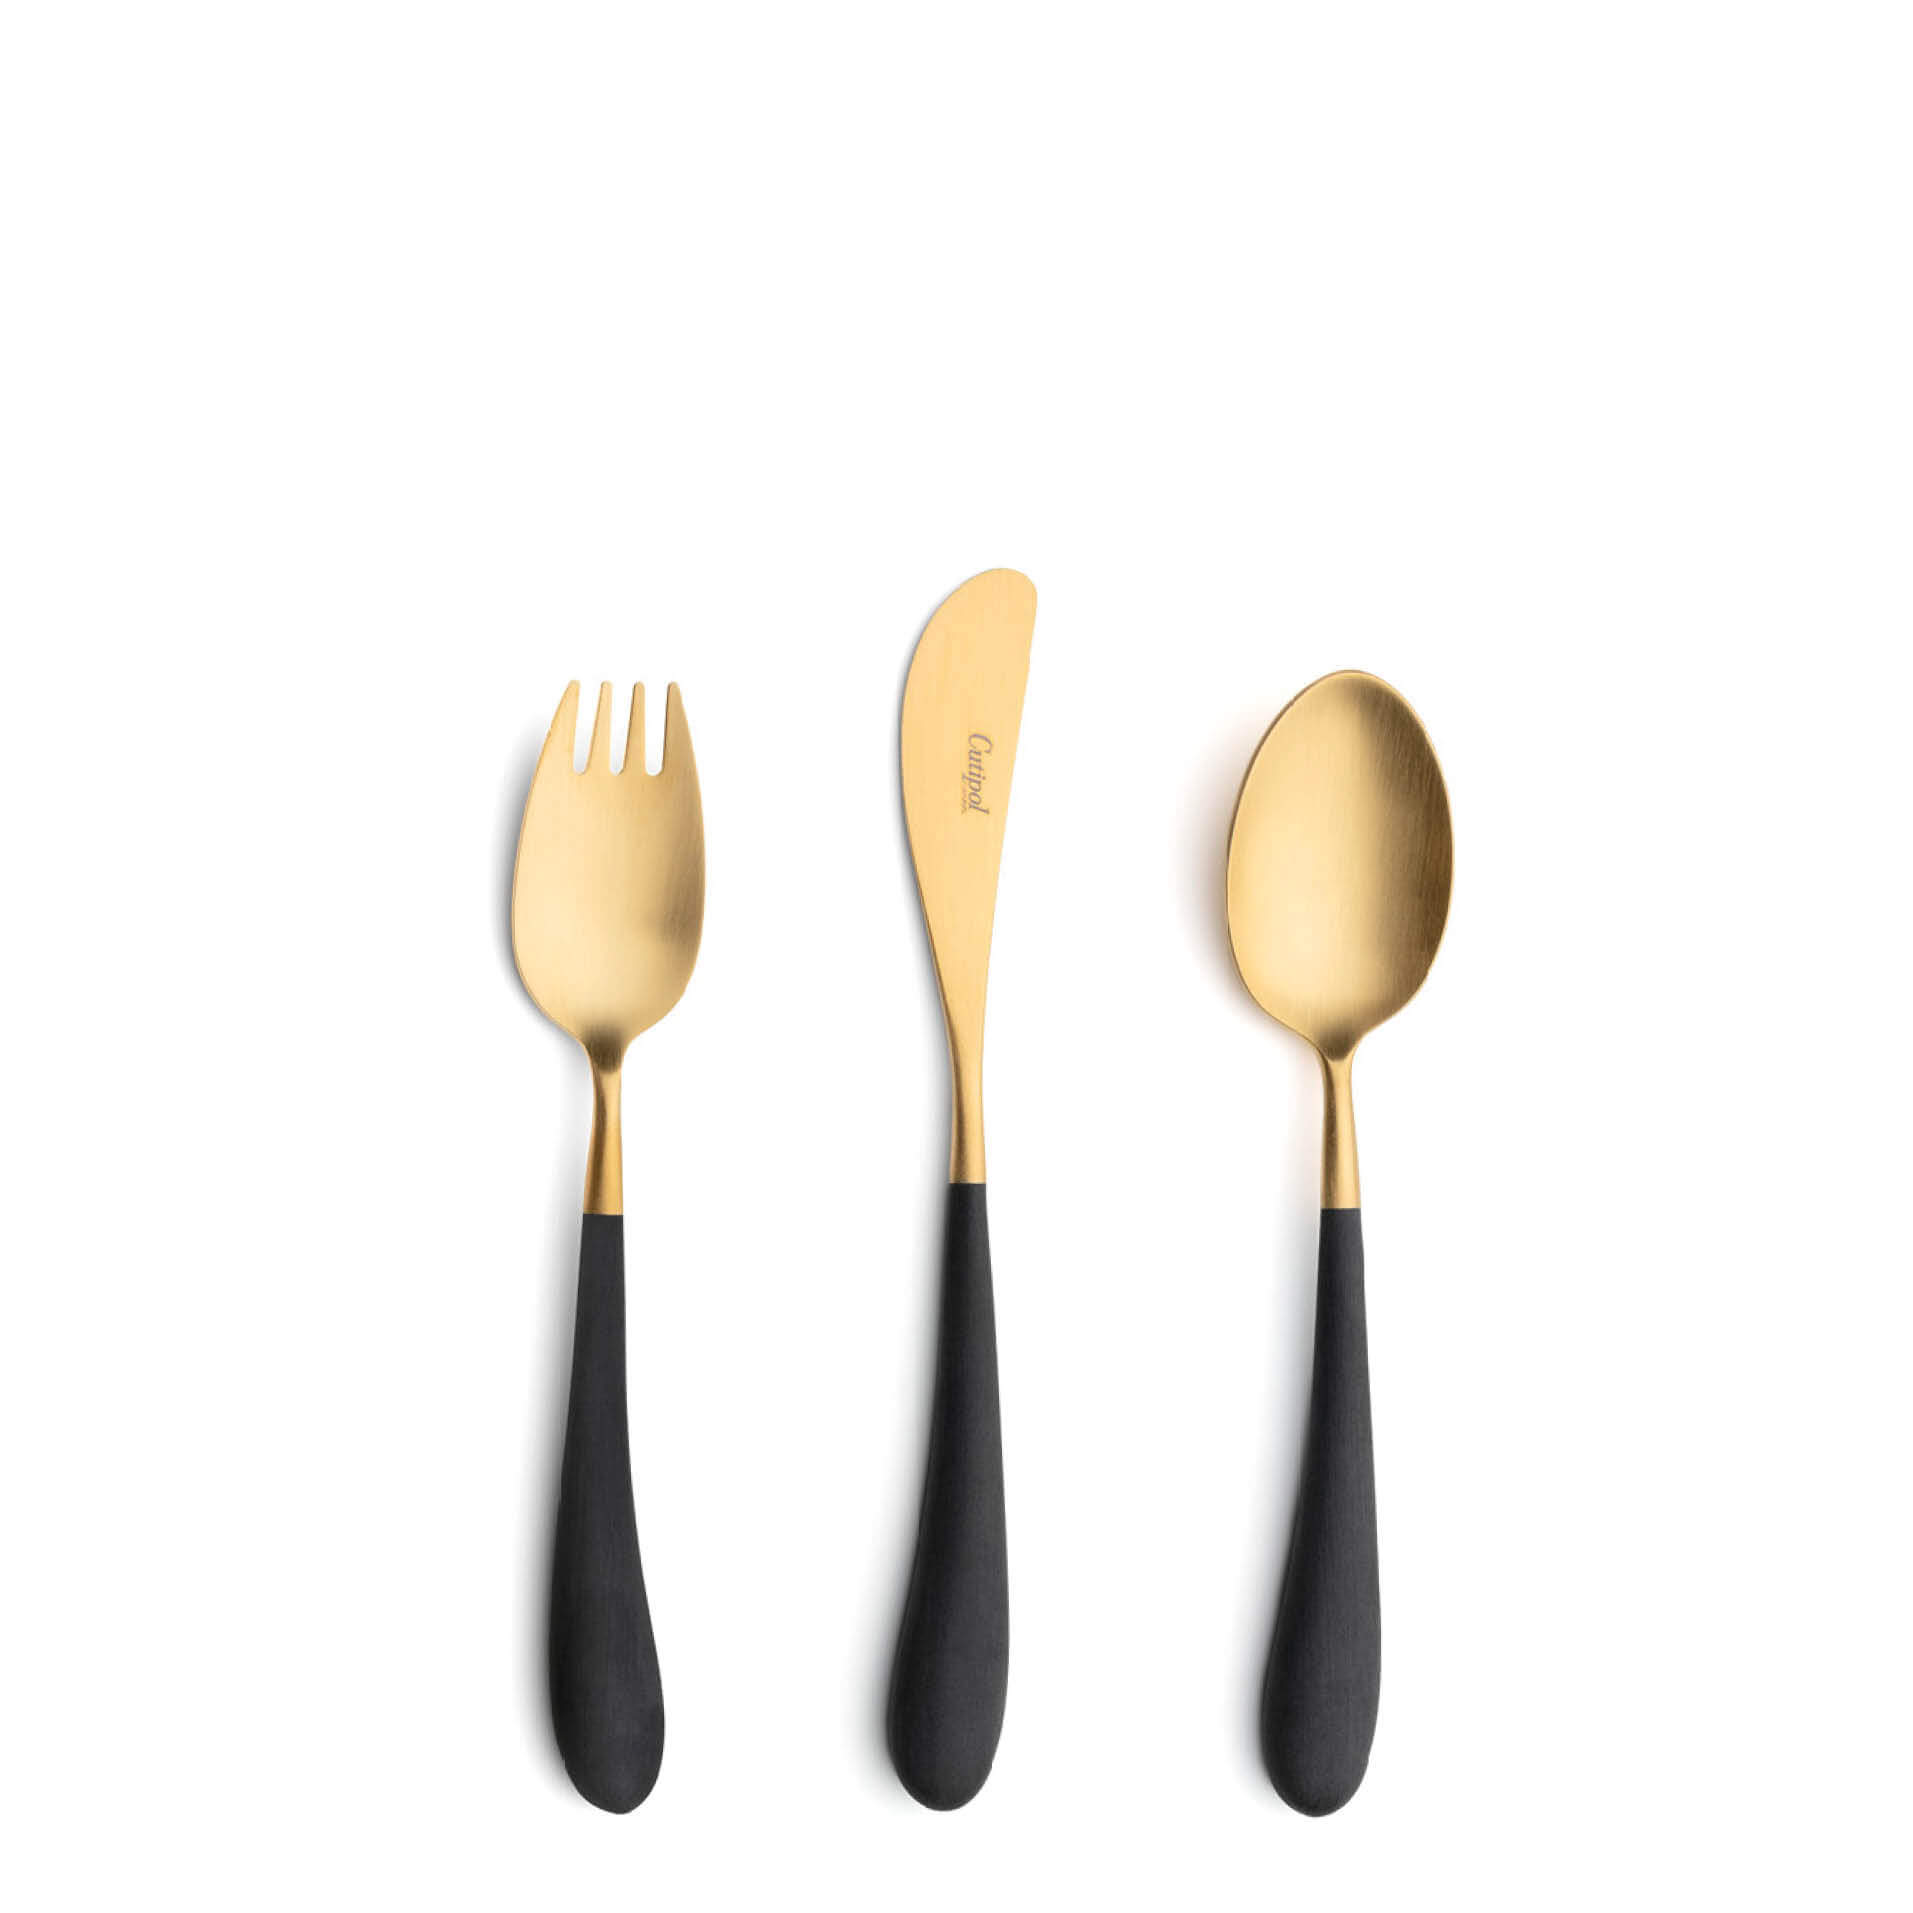 Cutipol Childrens Cutlery Alice with dinner fork, dinner knife, table spoon with black handles and matte gold finish